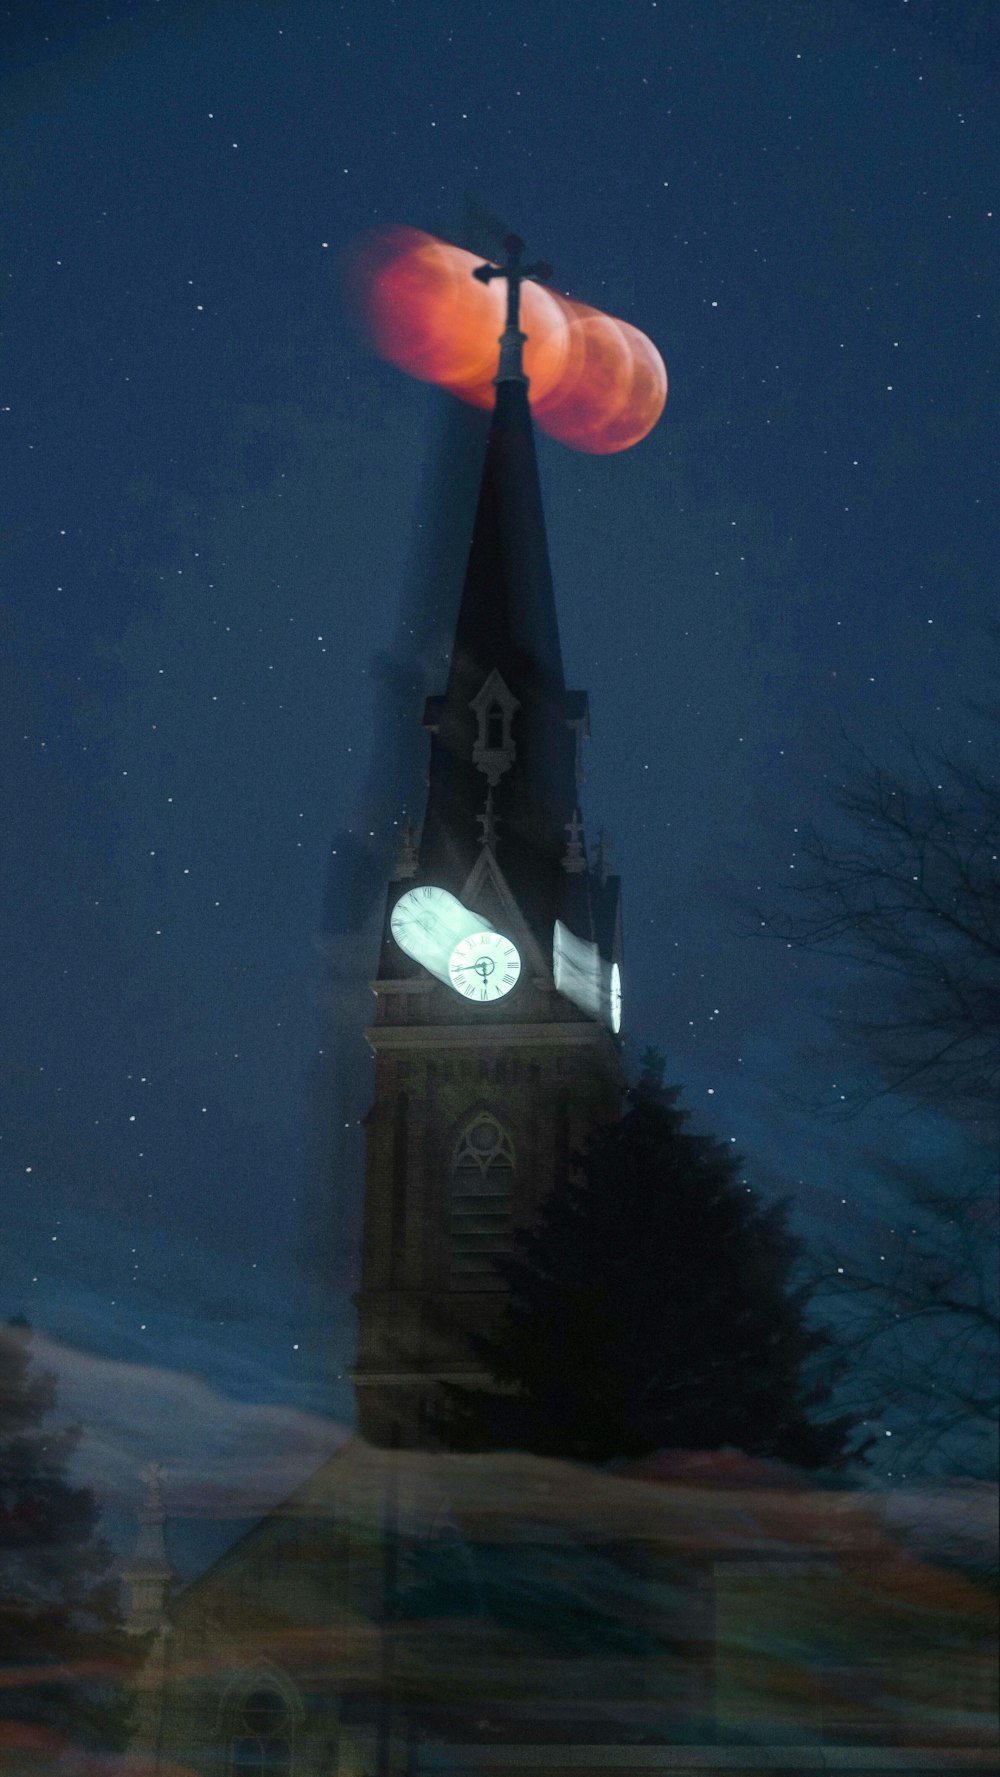 a clock tower with a red moon in the sky